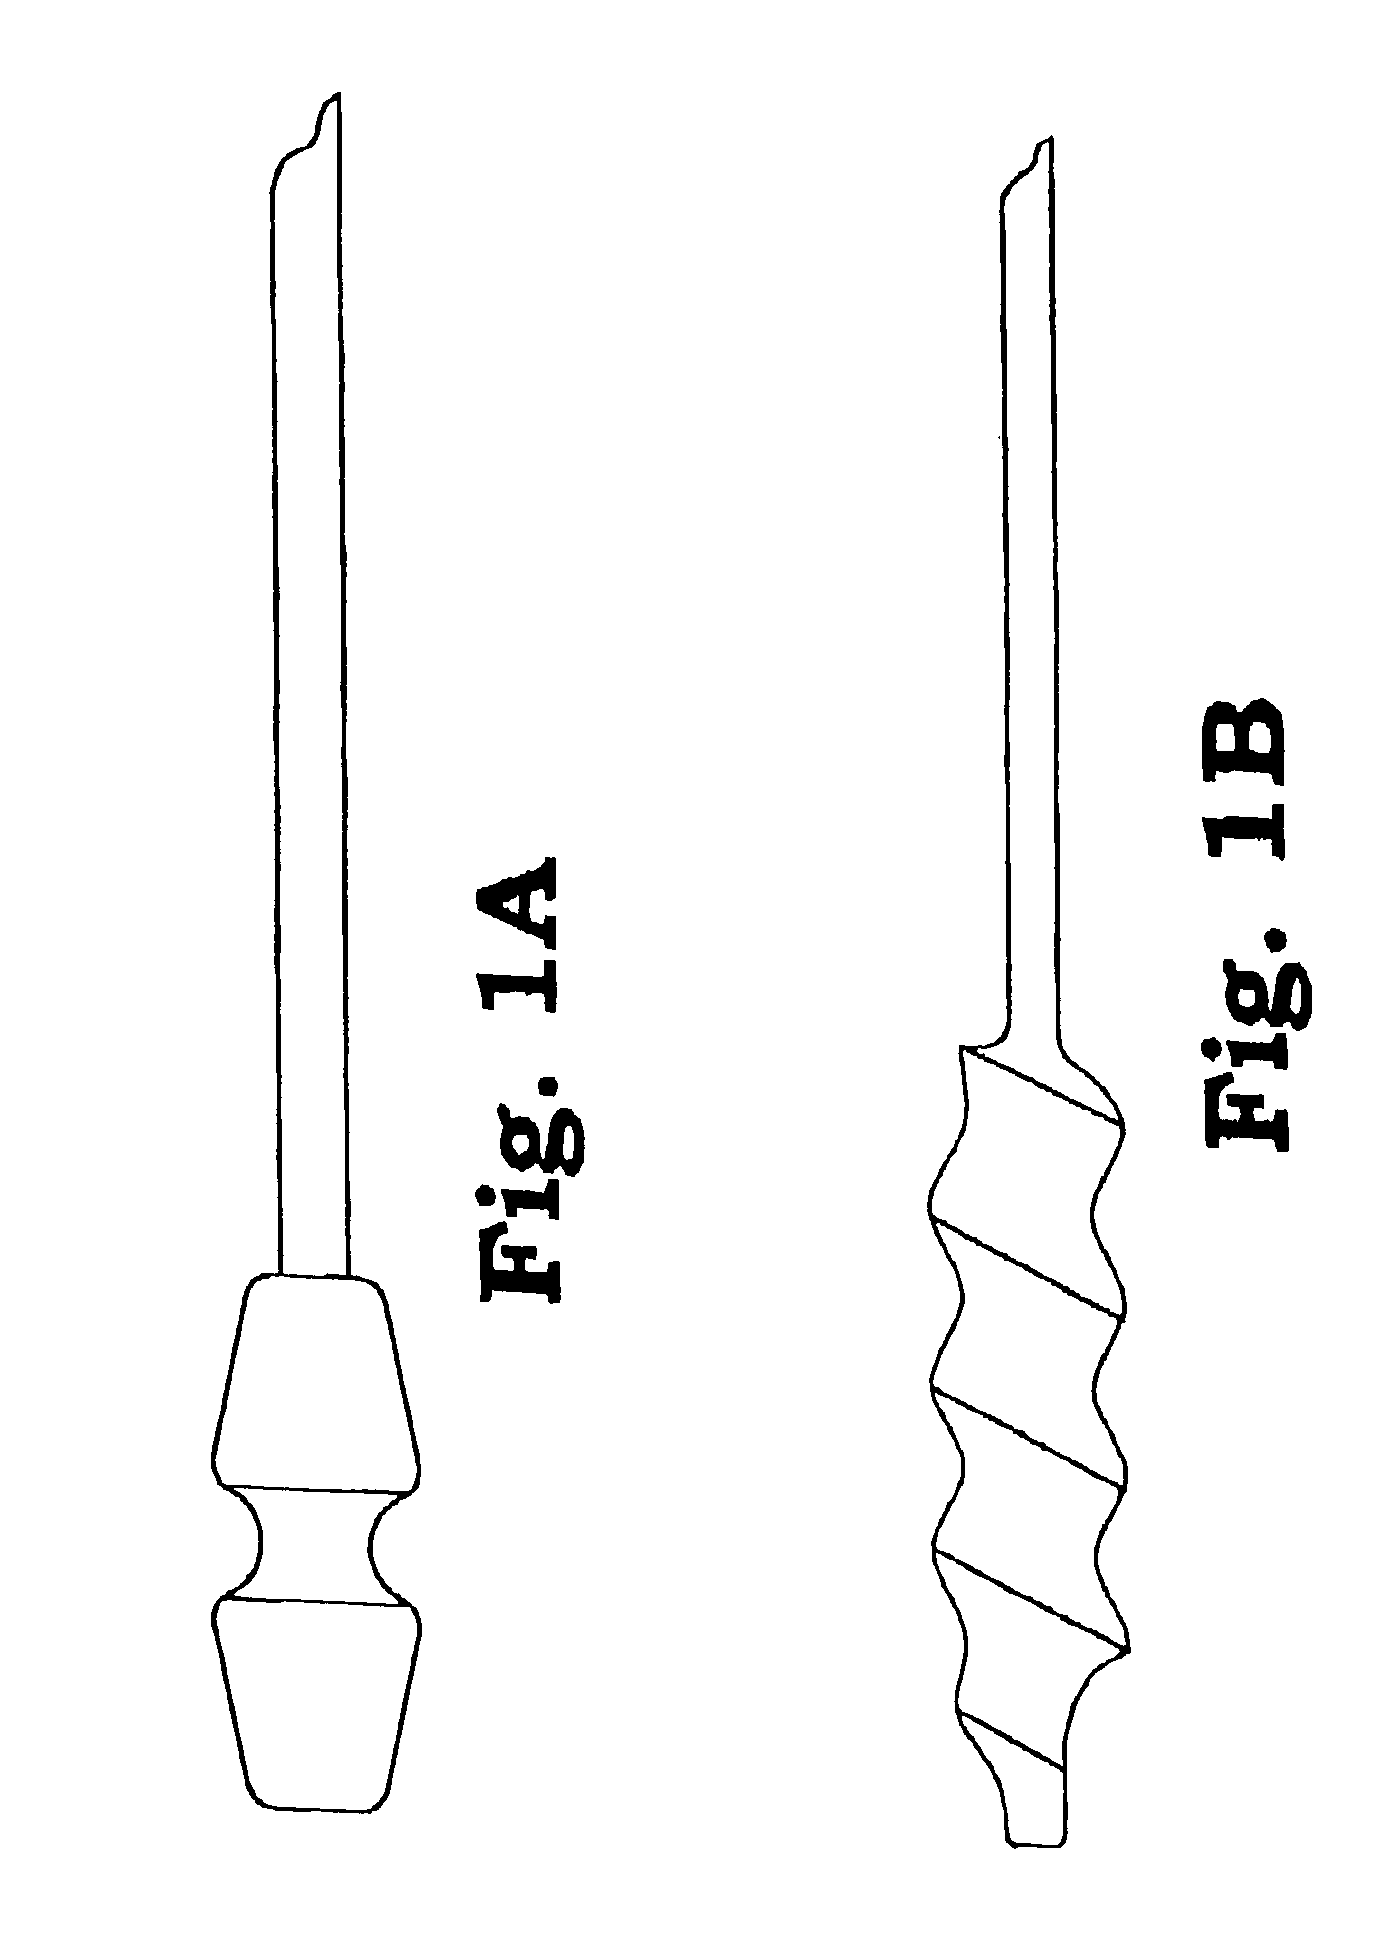 Method and apparatus for creating a pathway in an animal